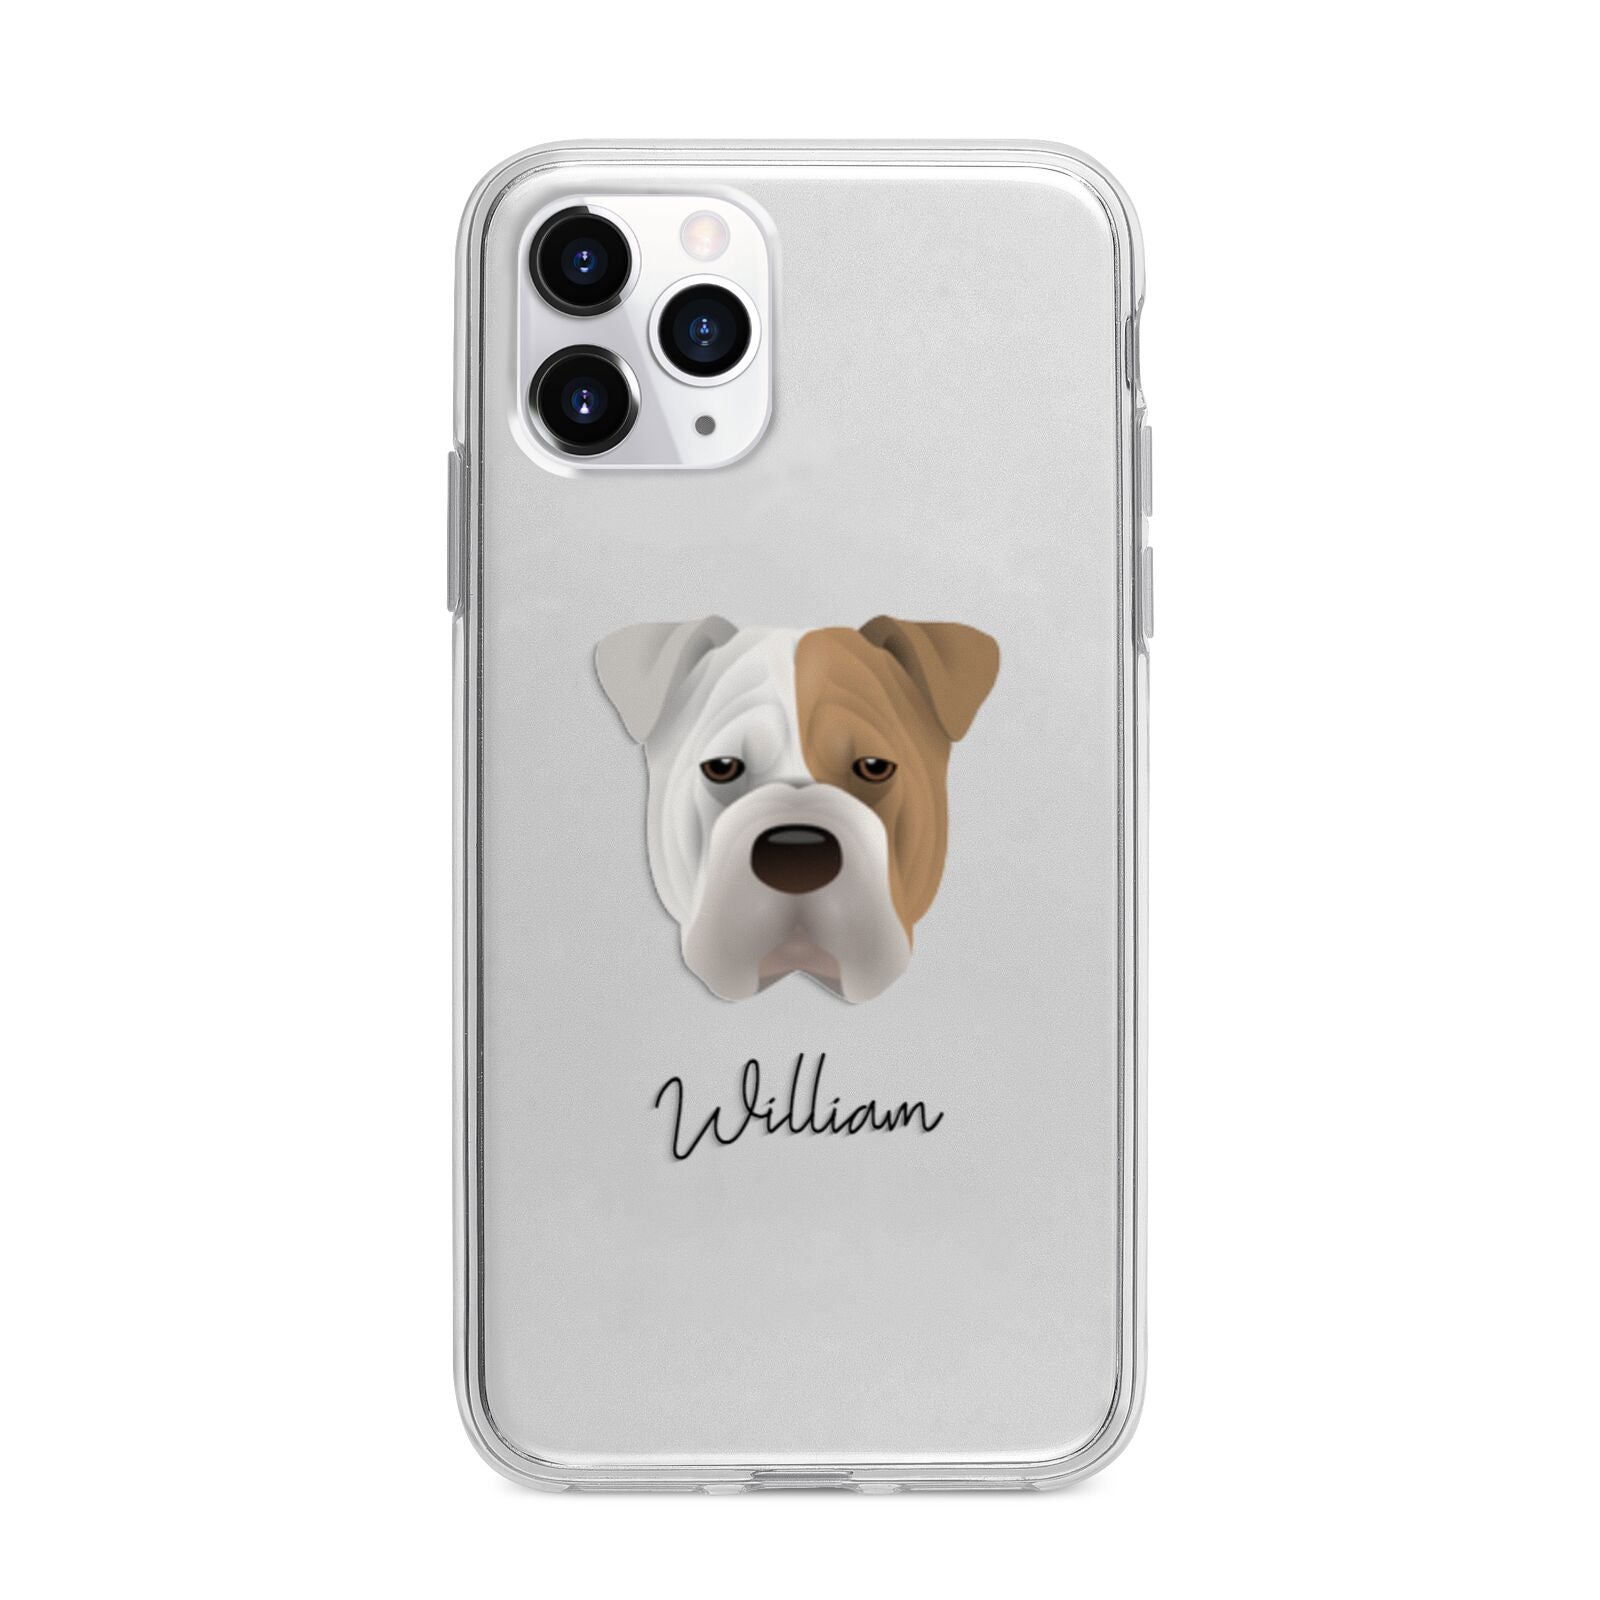 Bull Pei Personalised Apple iPhone 11 Pro Max in Silver with Bumper Case